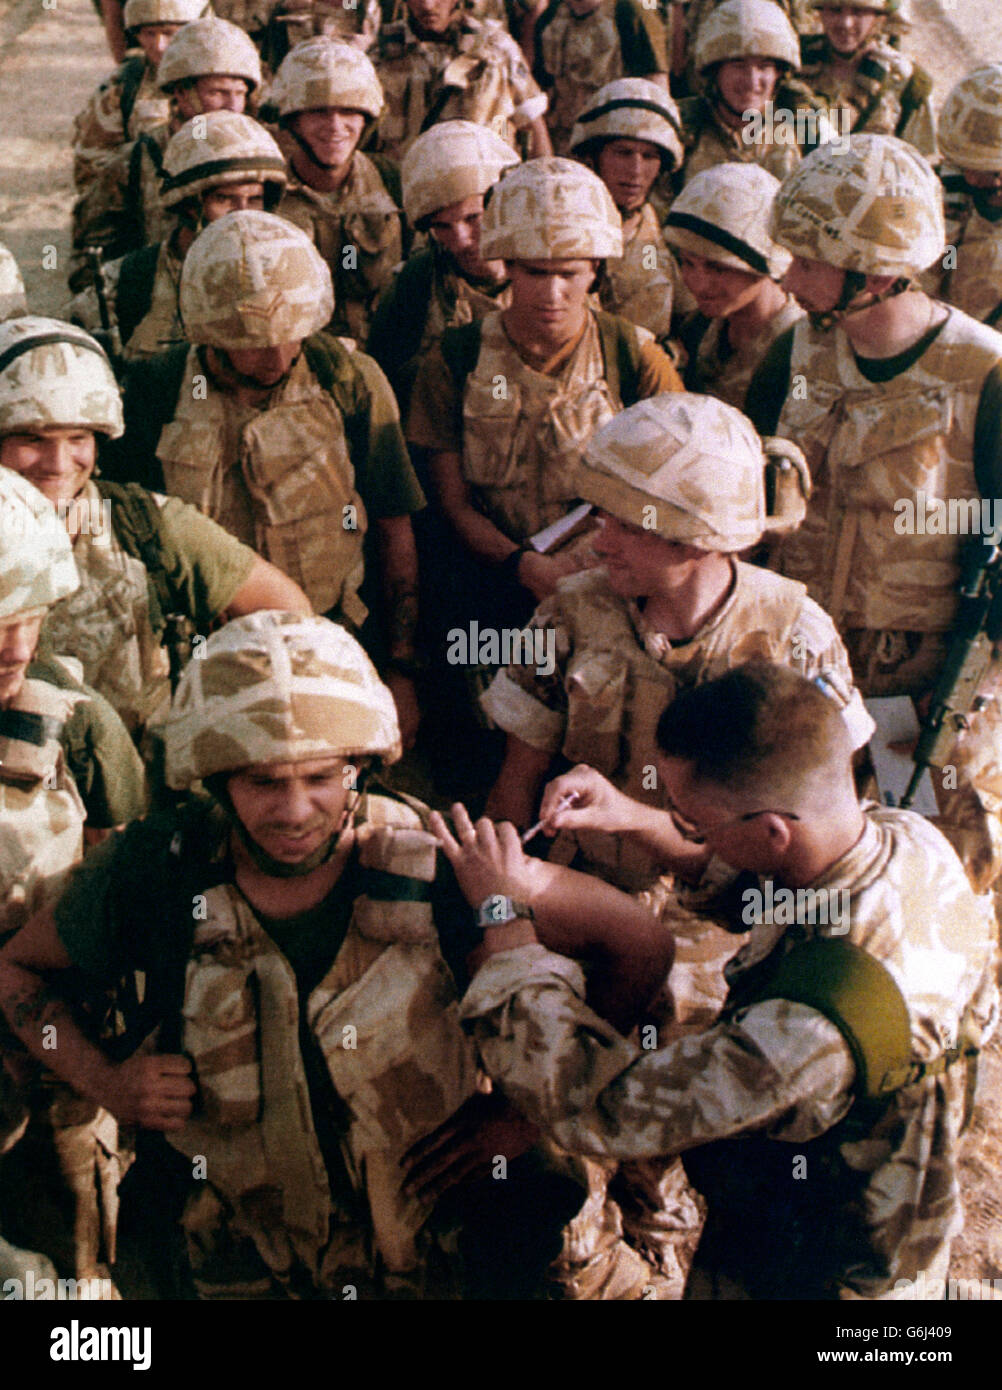 'B' Company of the Royal Scots receiving their injections against chemical attack in the Gulf. Stock Photo